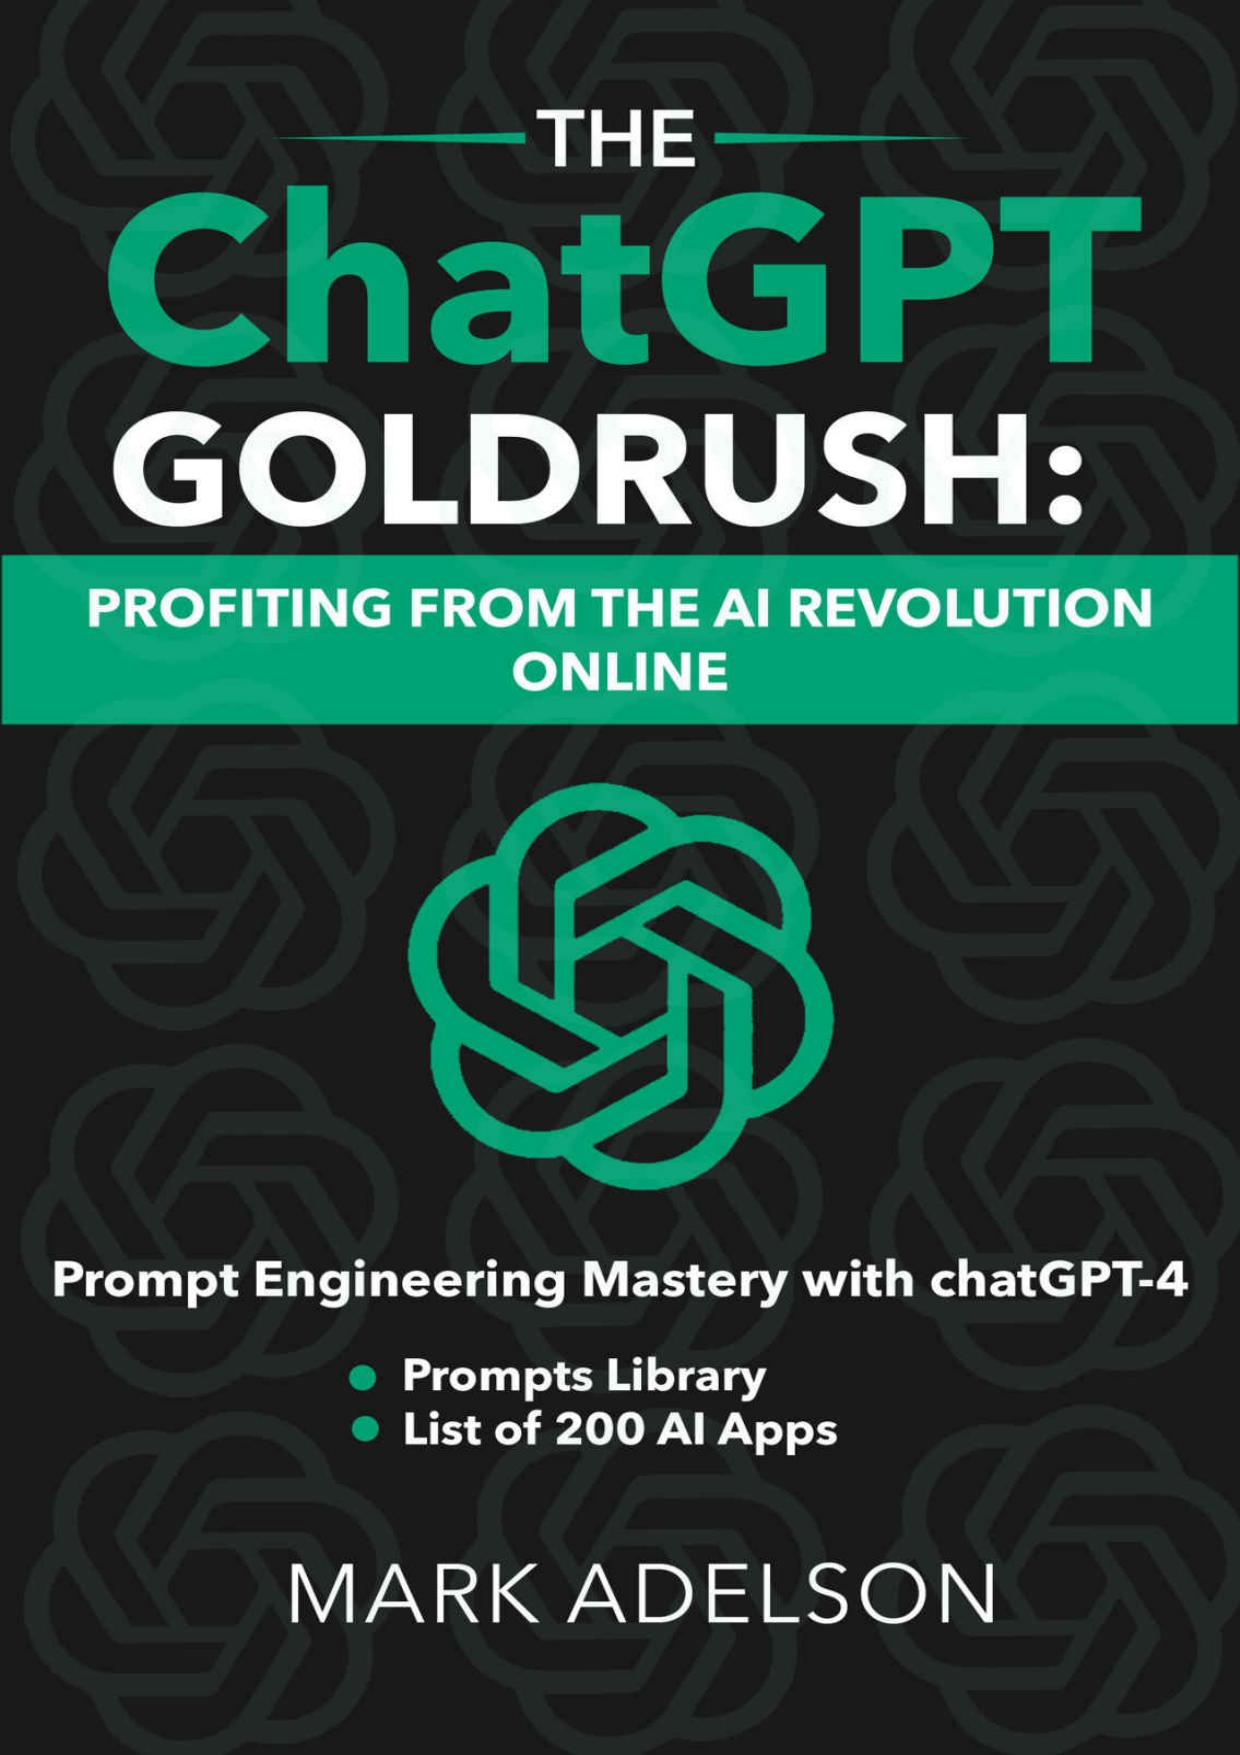 The ChatGPT GoldRush: Profiting from the AI Revolution Online: Prompt Engineering Mastery with ChatGPT